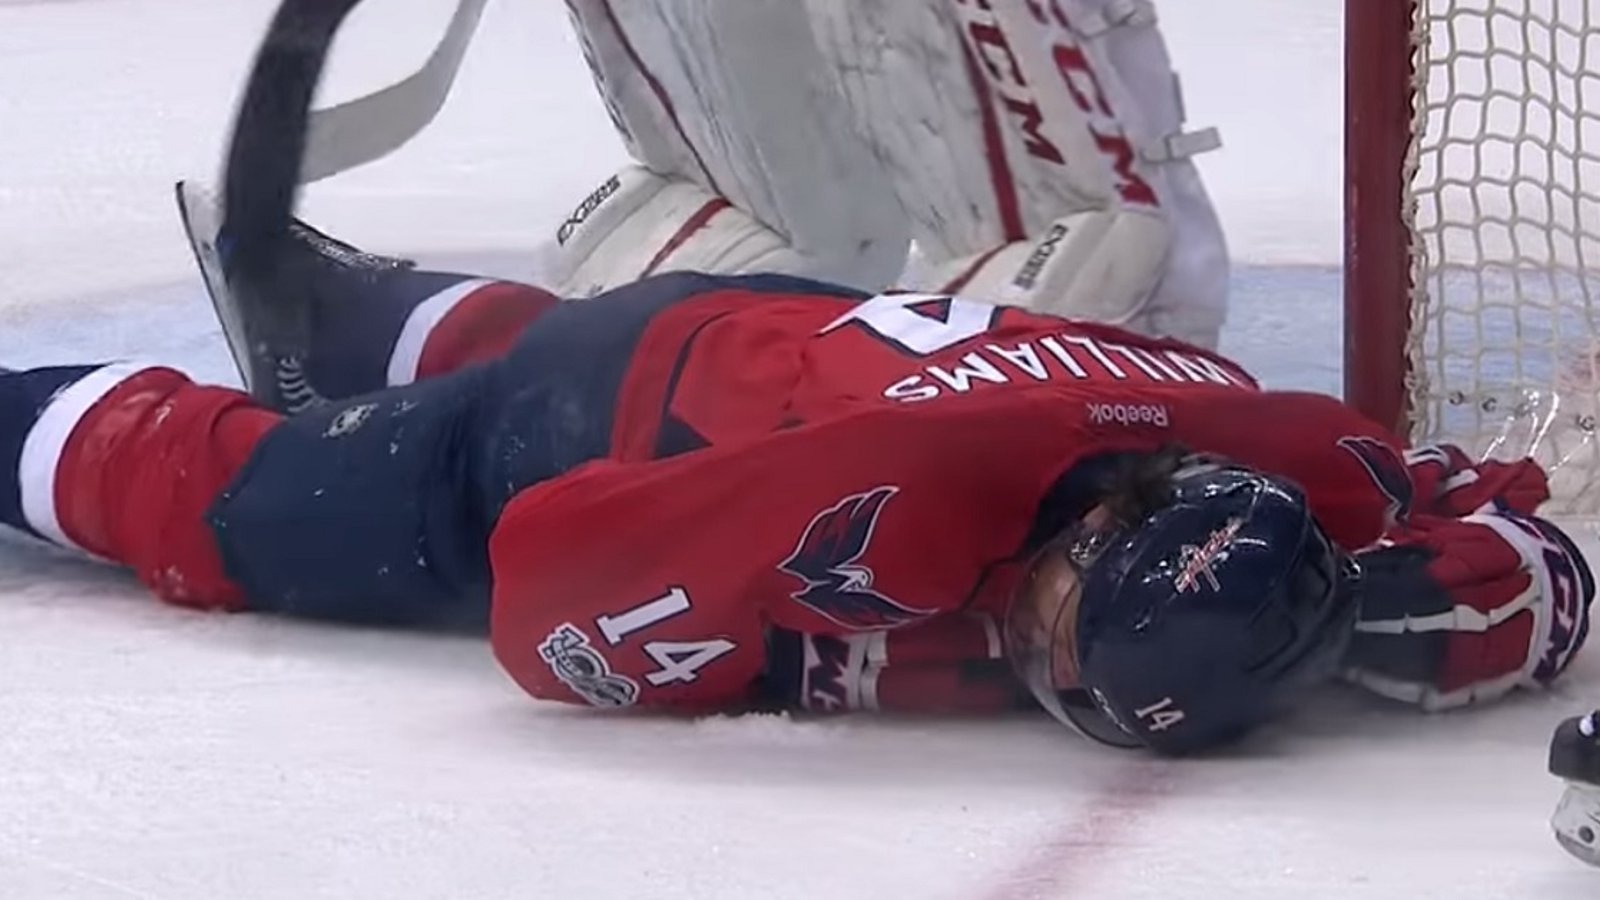 OUCH! Williams goes down after eating a one-timer in the head.